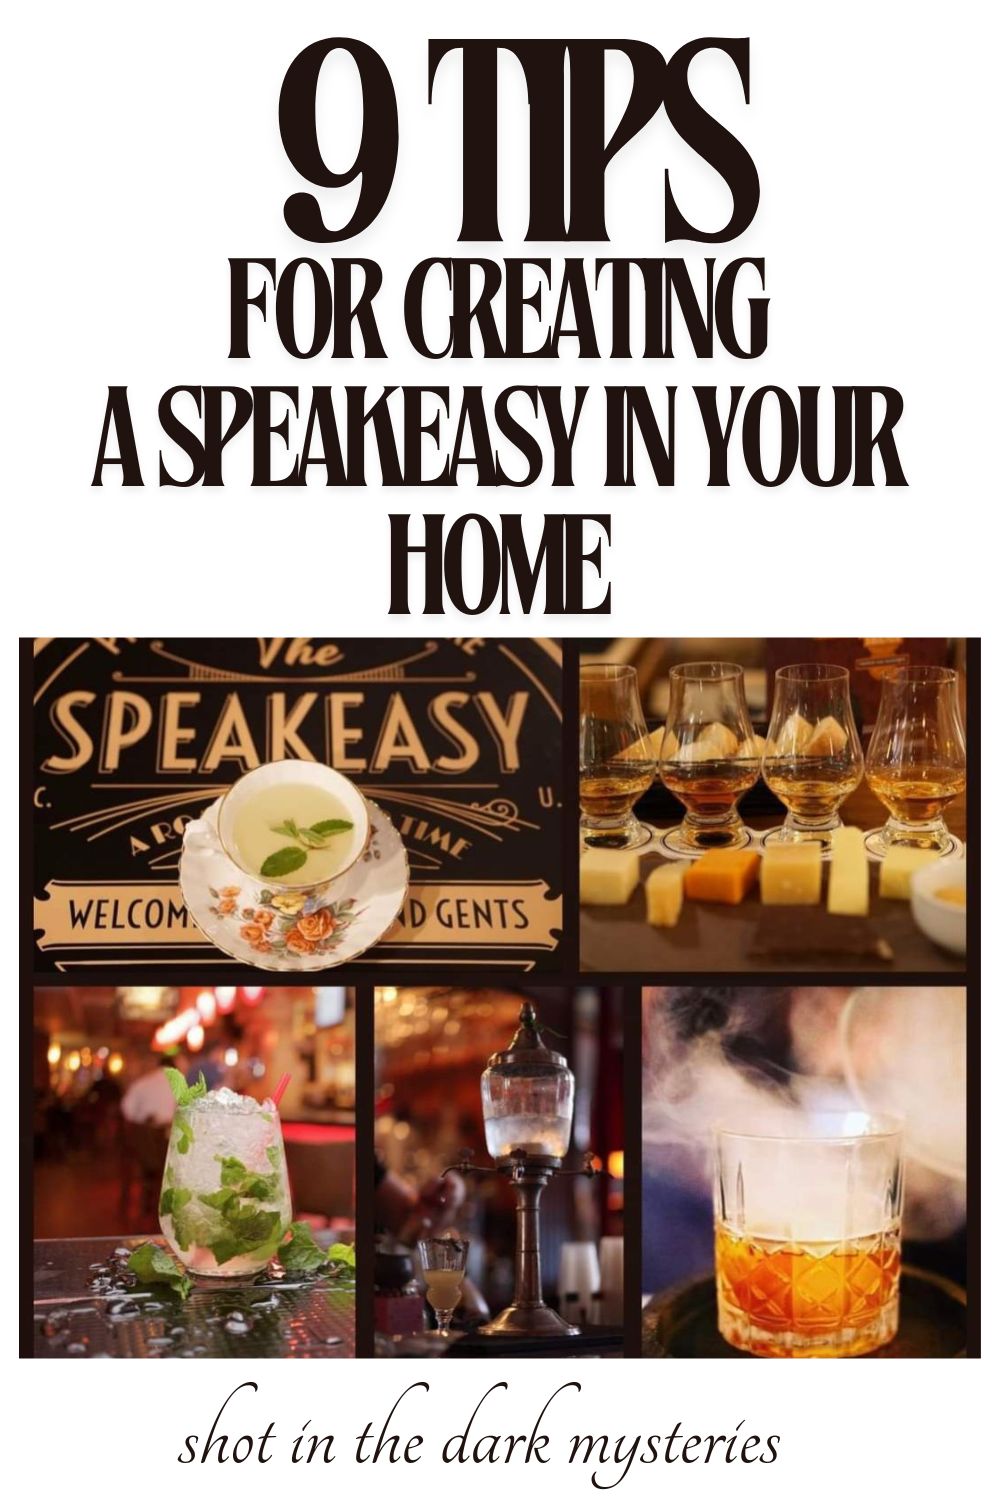 9 Tips for Creating a Speakeasy in your Home